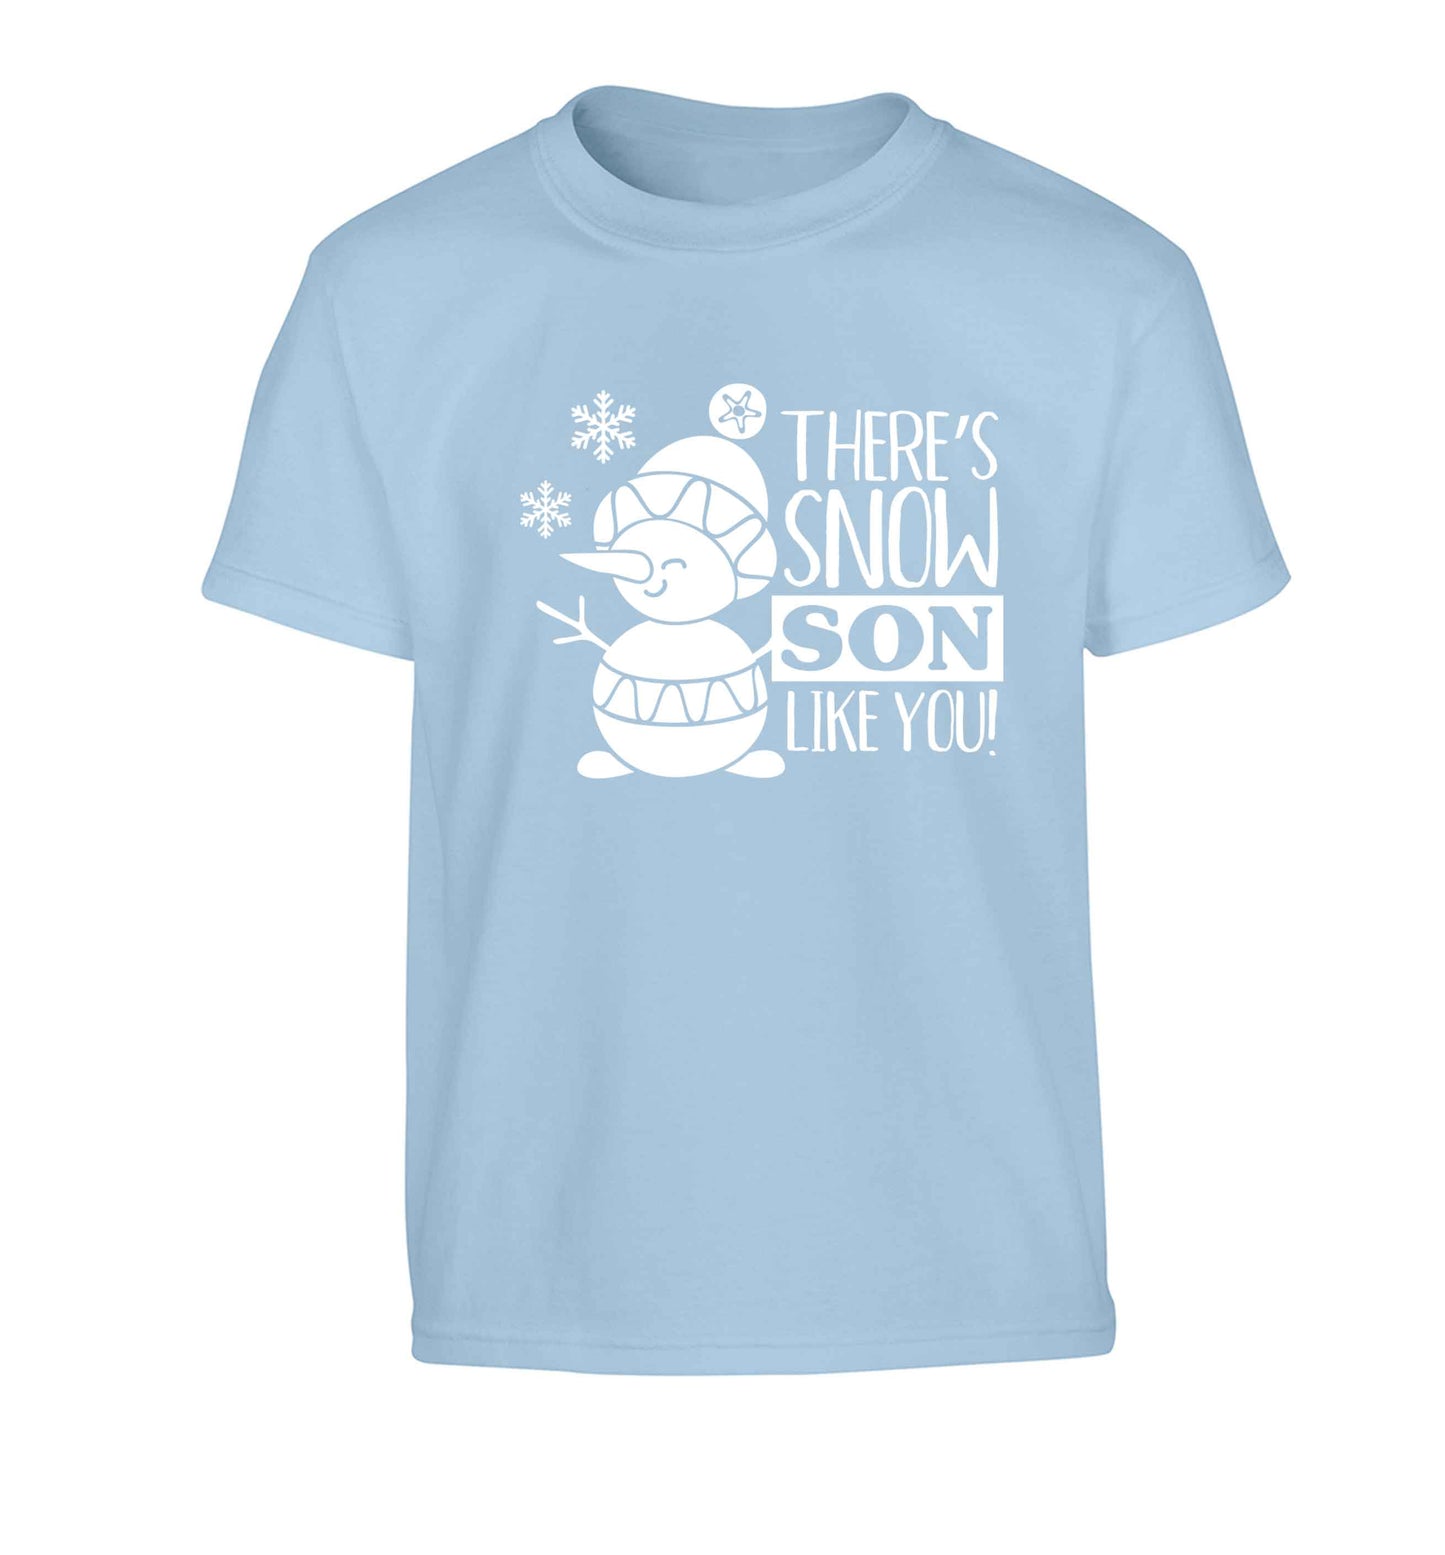 There's snow son like you Children's light blue Tshirt 12-13 Years